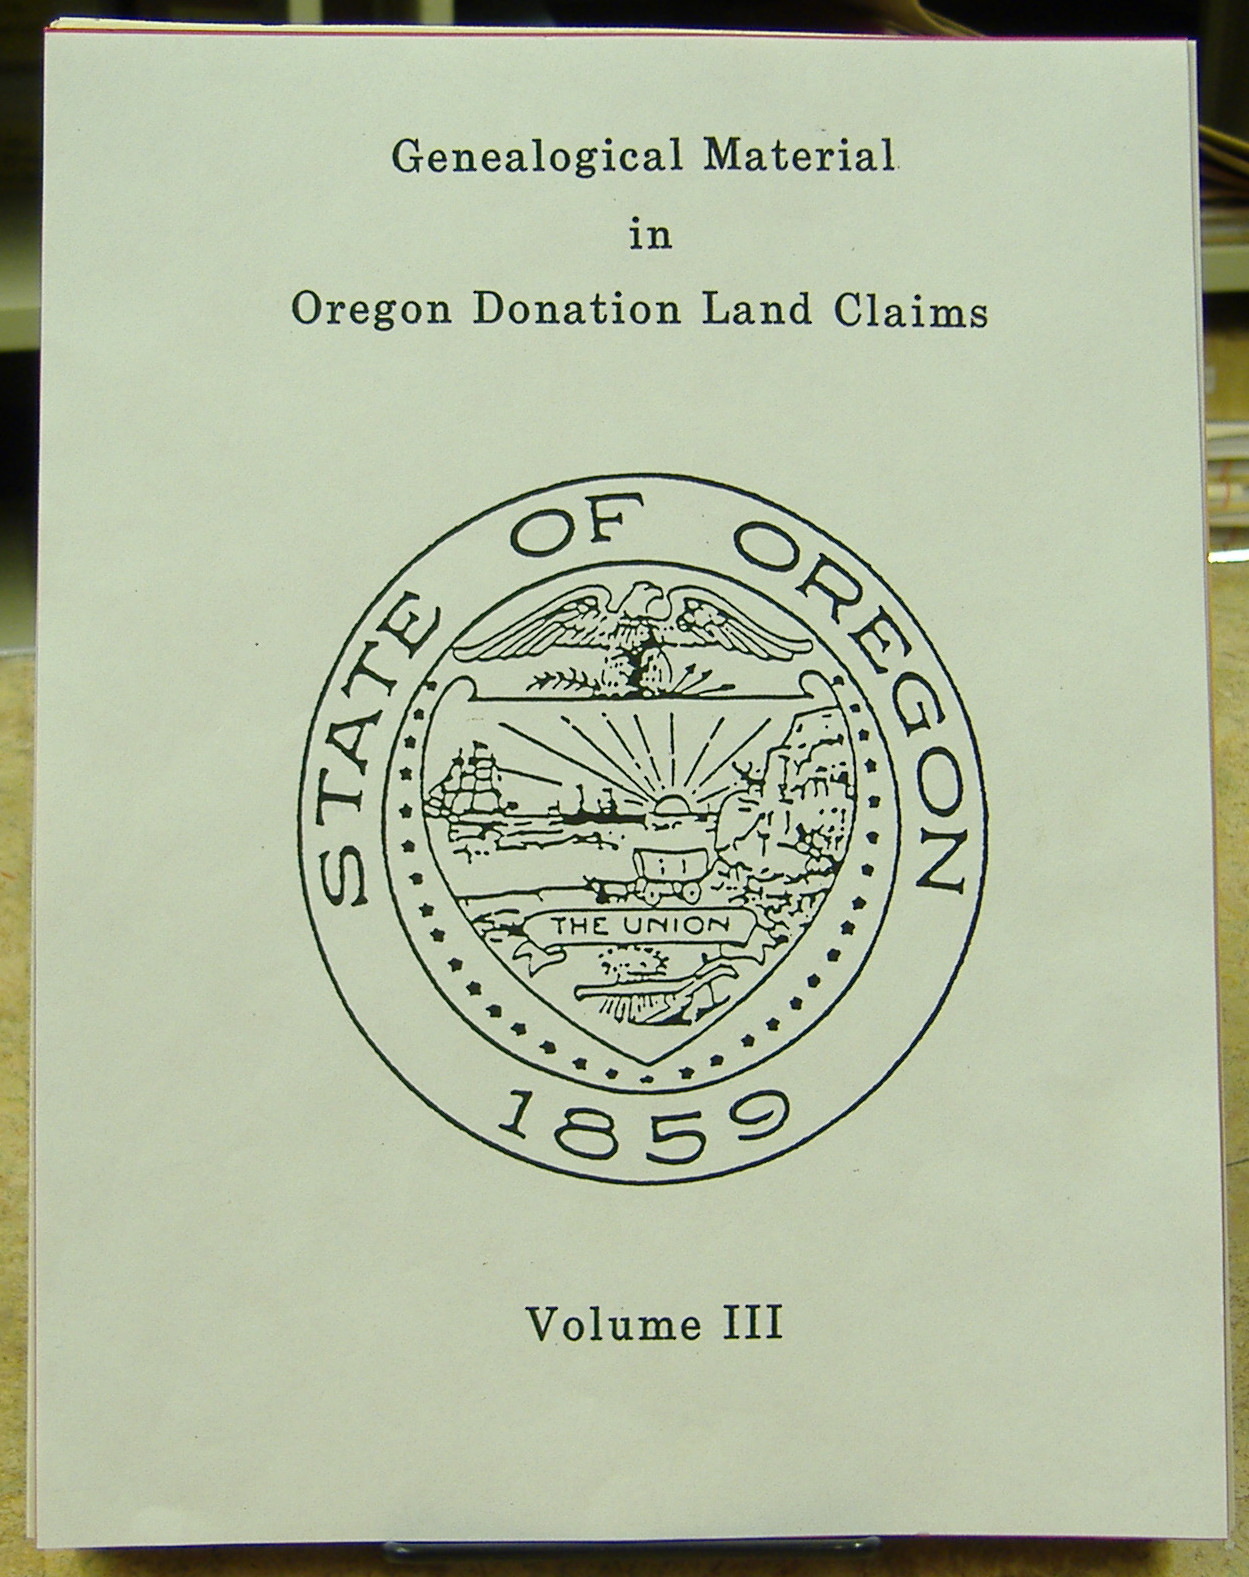 Genealogical Material in Oregon Donation Land Claims Vol III, pp. 230